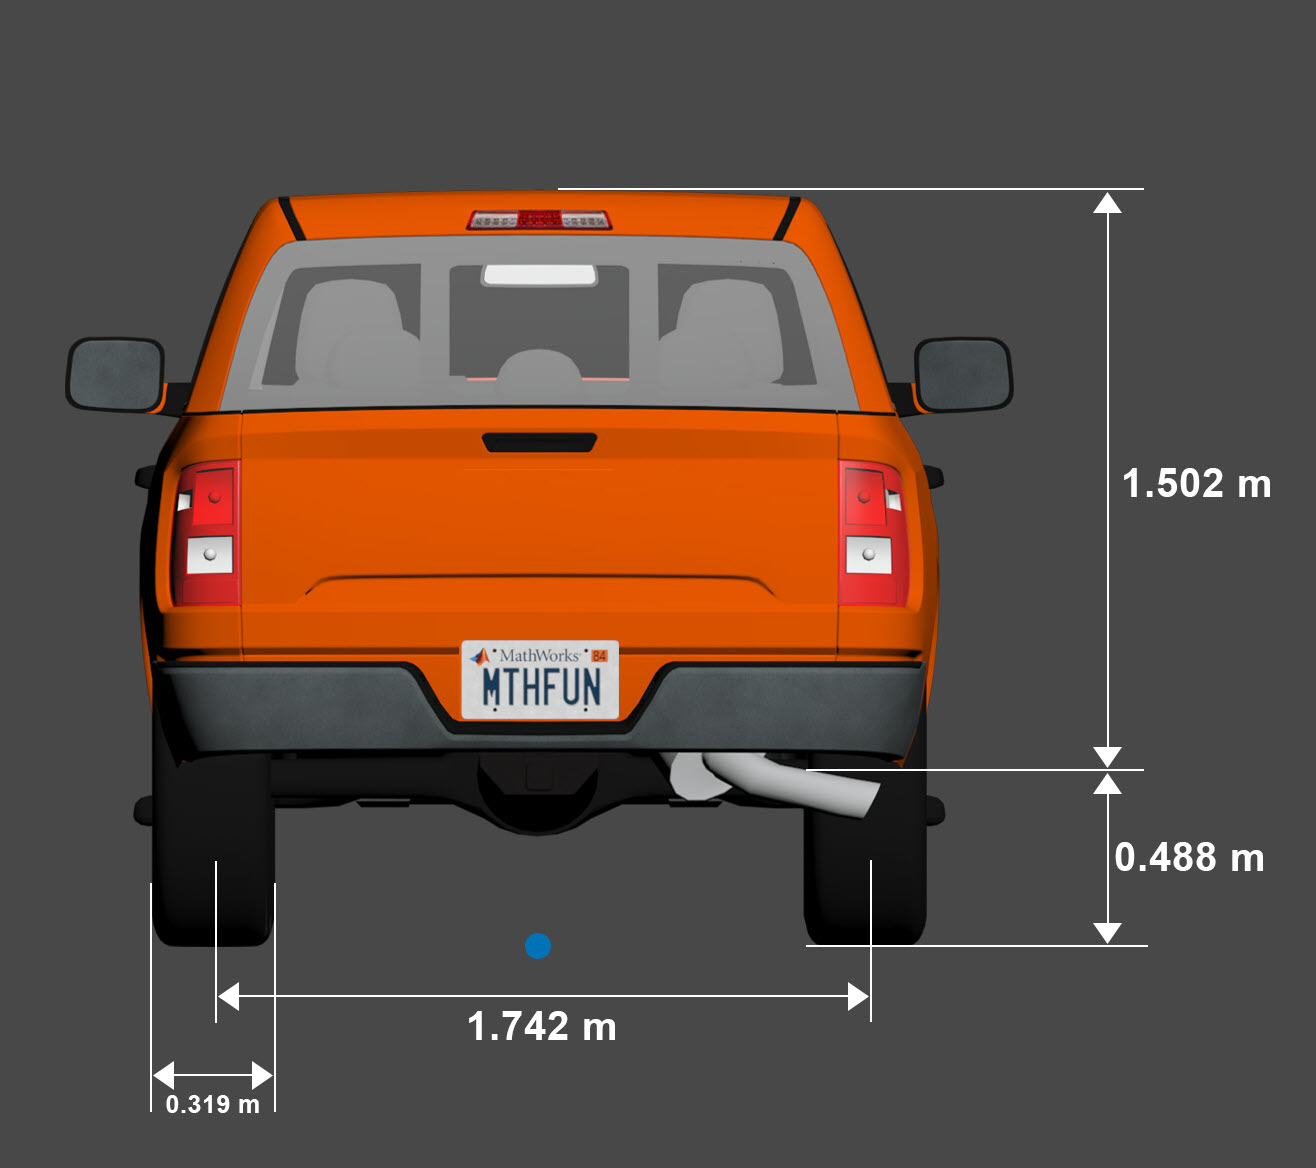 Rear view of small pickup truck with the origin marked in blue beneath its center and its rear tire width, rear axle dimensions, and height shown. The rear tire width is 0.319 meters. The rear axle width is 1.742 meters. The height from the ground to the tire center is 0.488 meters. The height from the tire center to the top of the vehicle is 1.502 meters.